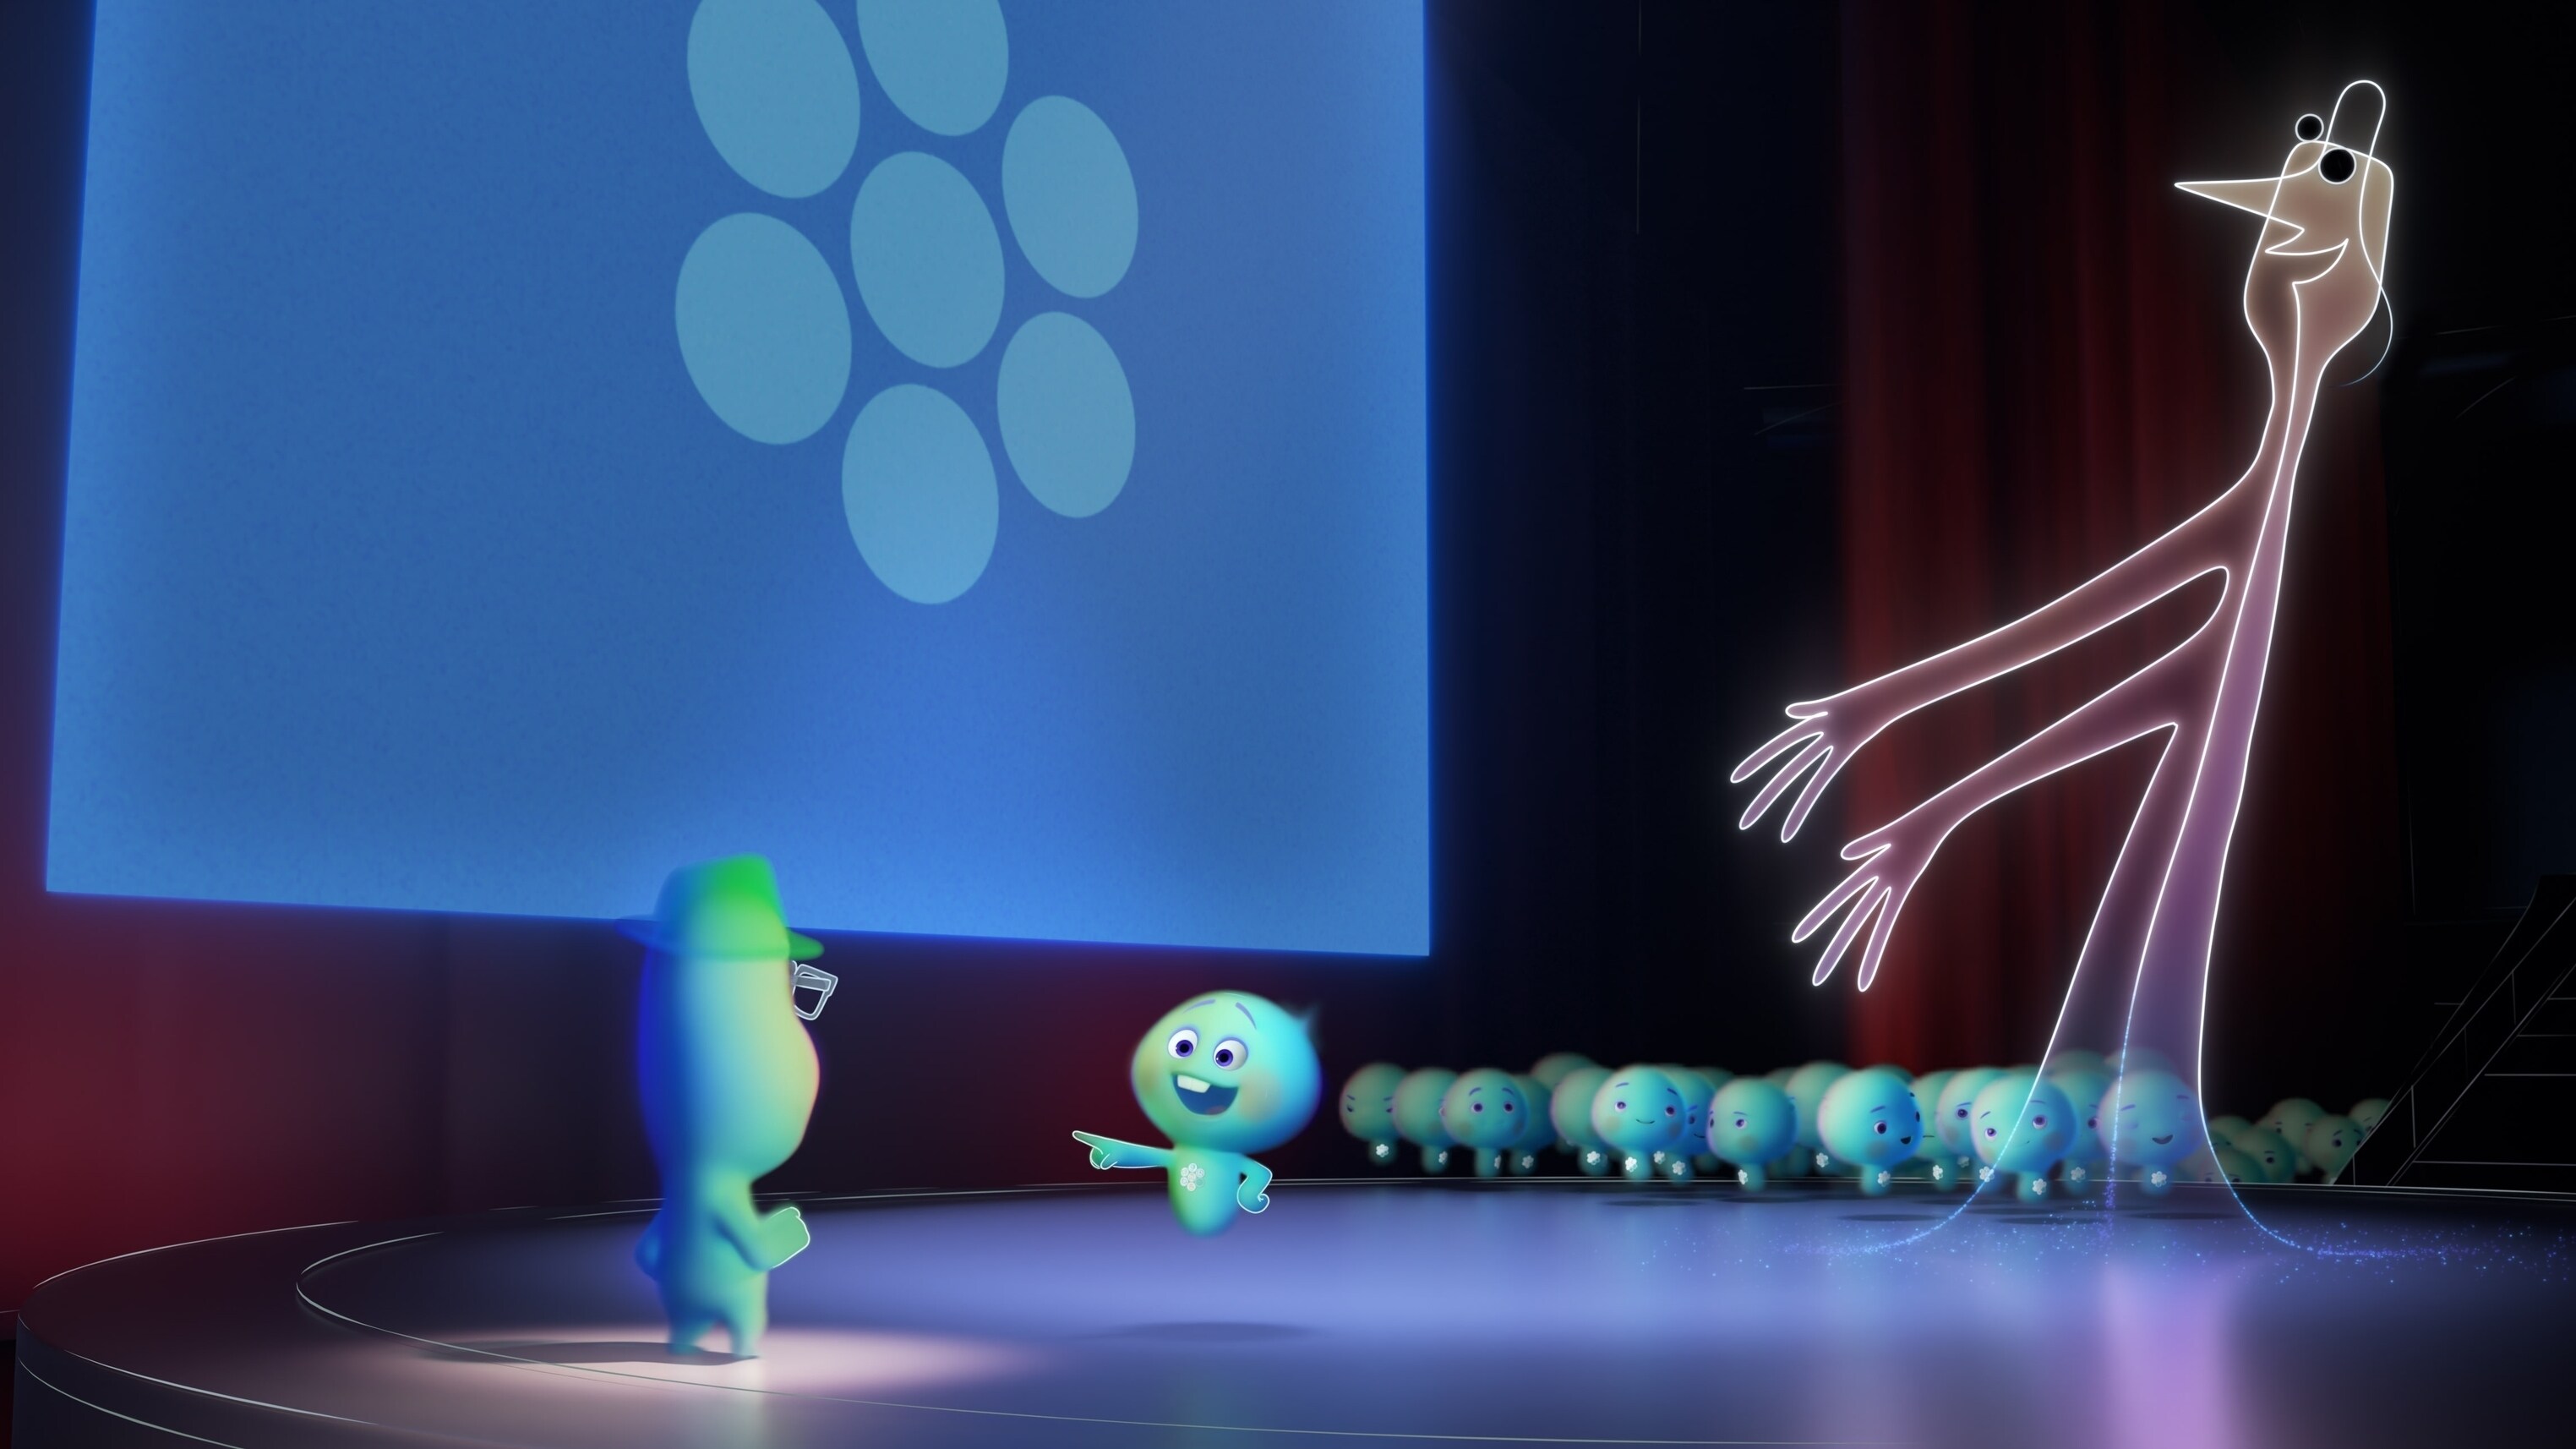 An Inside Look at the Animation in Pixar’s Soul